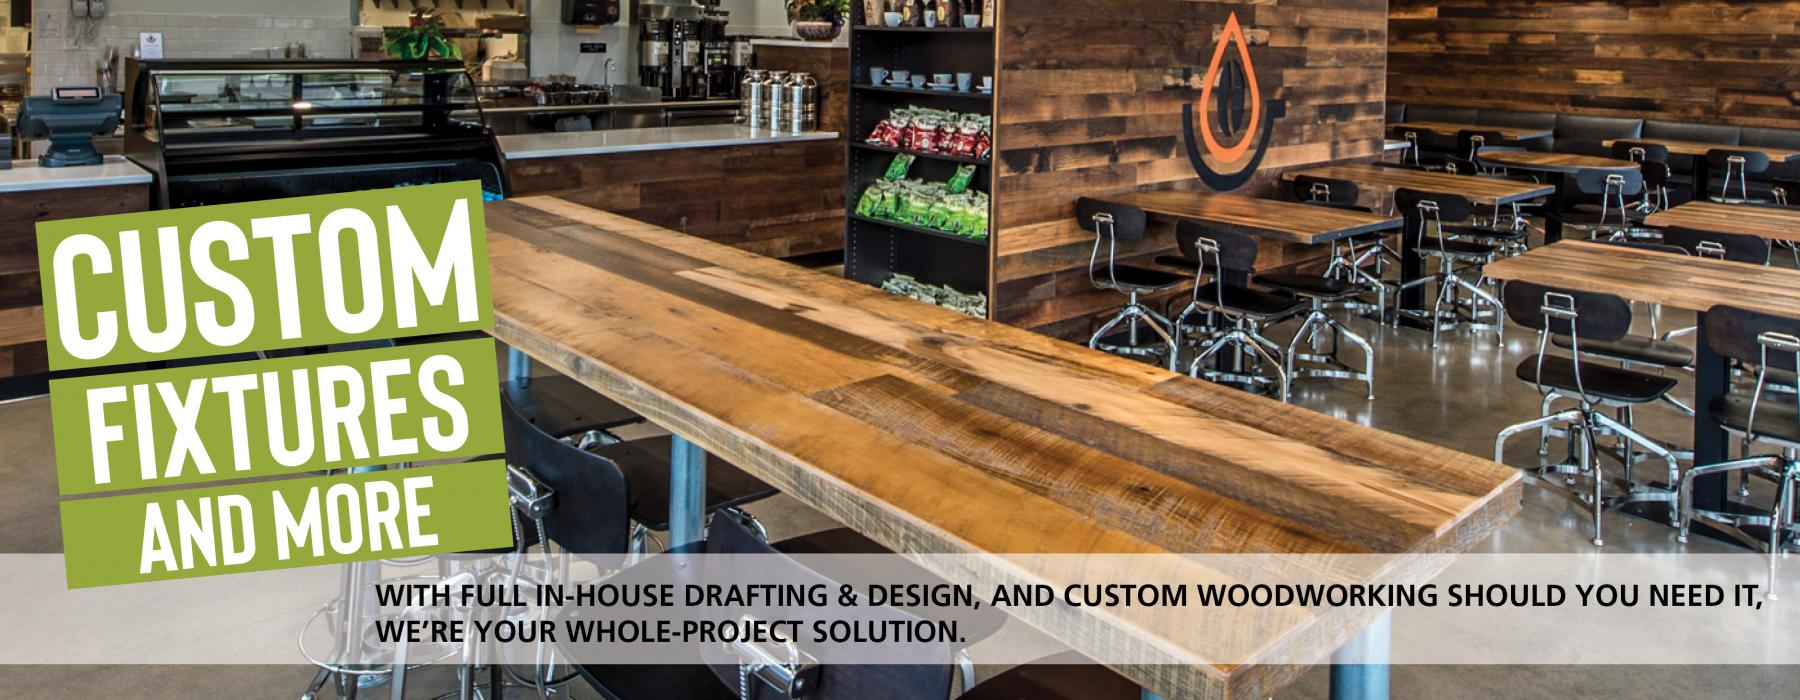 Pioneer Millworks Reclaimed Wood Tables, Counters, and Custom Fixtures